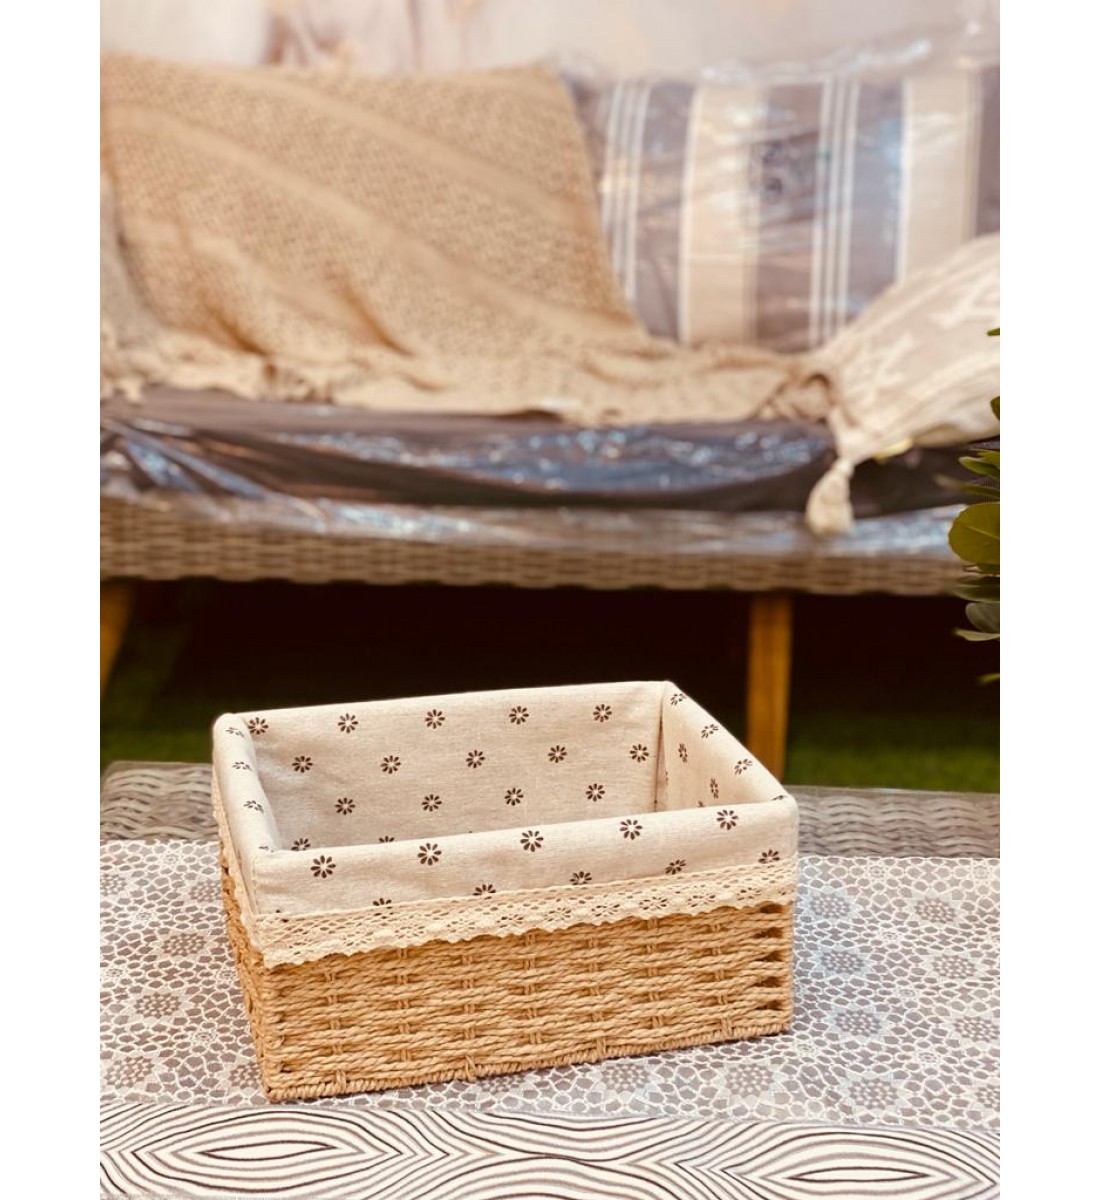 Fabric-clothed wicker basket